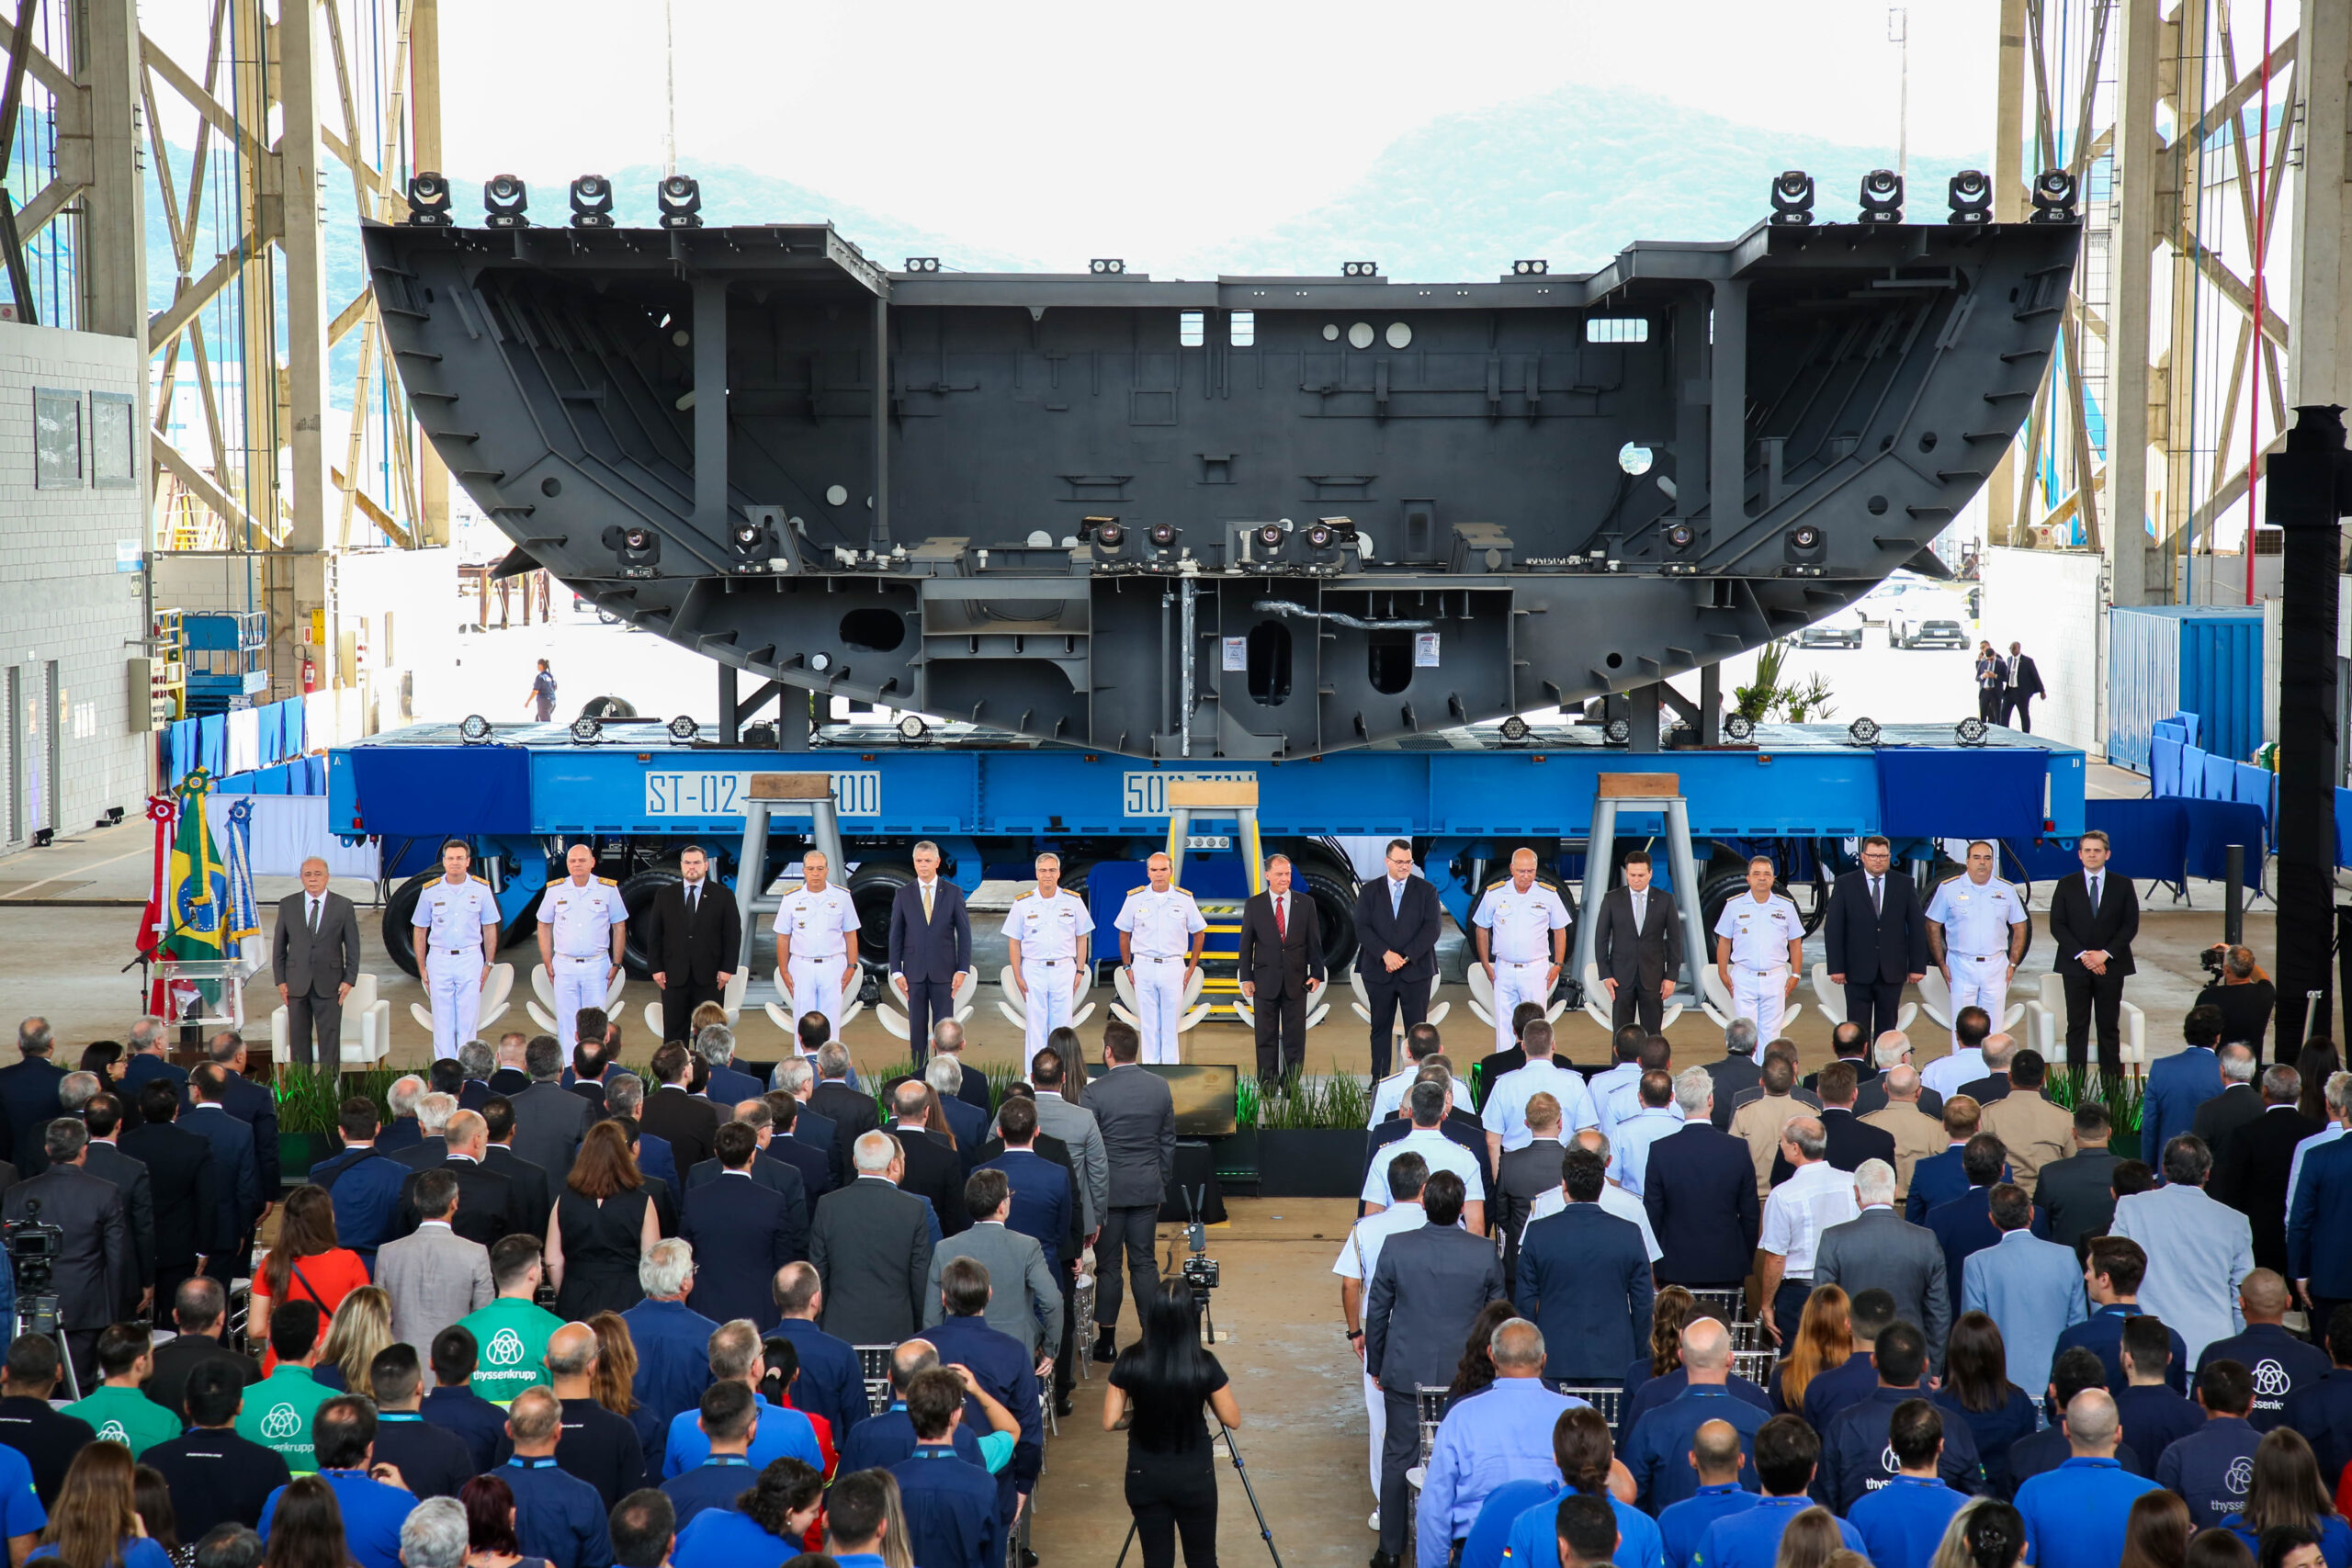 Tamandaré frigate keel laying marks innovation in military shipbuilding in Brazil